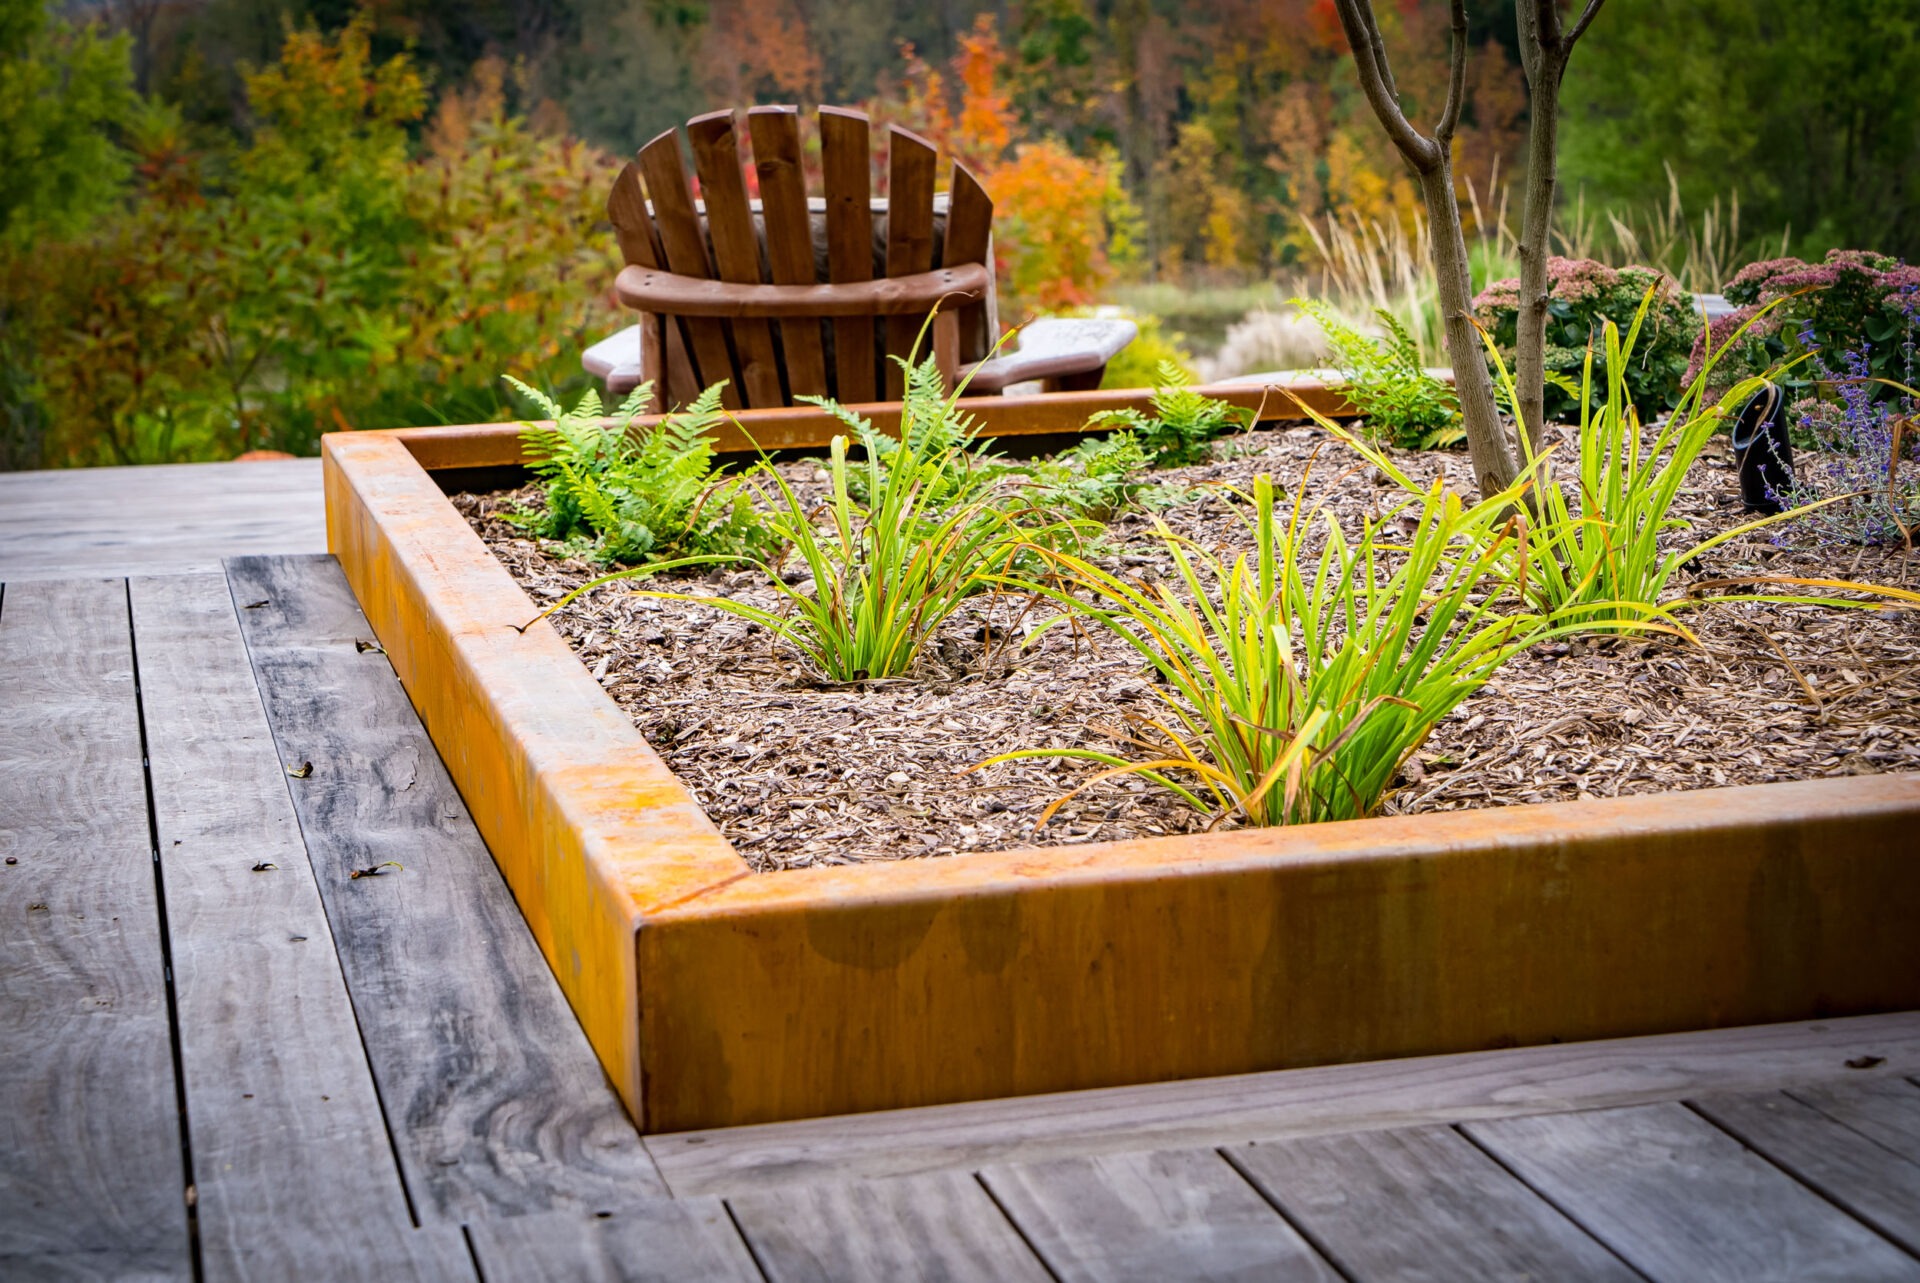 A wooden deck with a raised garden bed featuring green foliage and mulch. In the background, there's an Adirondack chair facing autumn-colored trees.